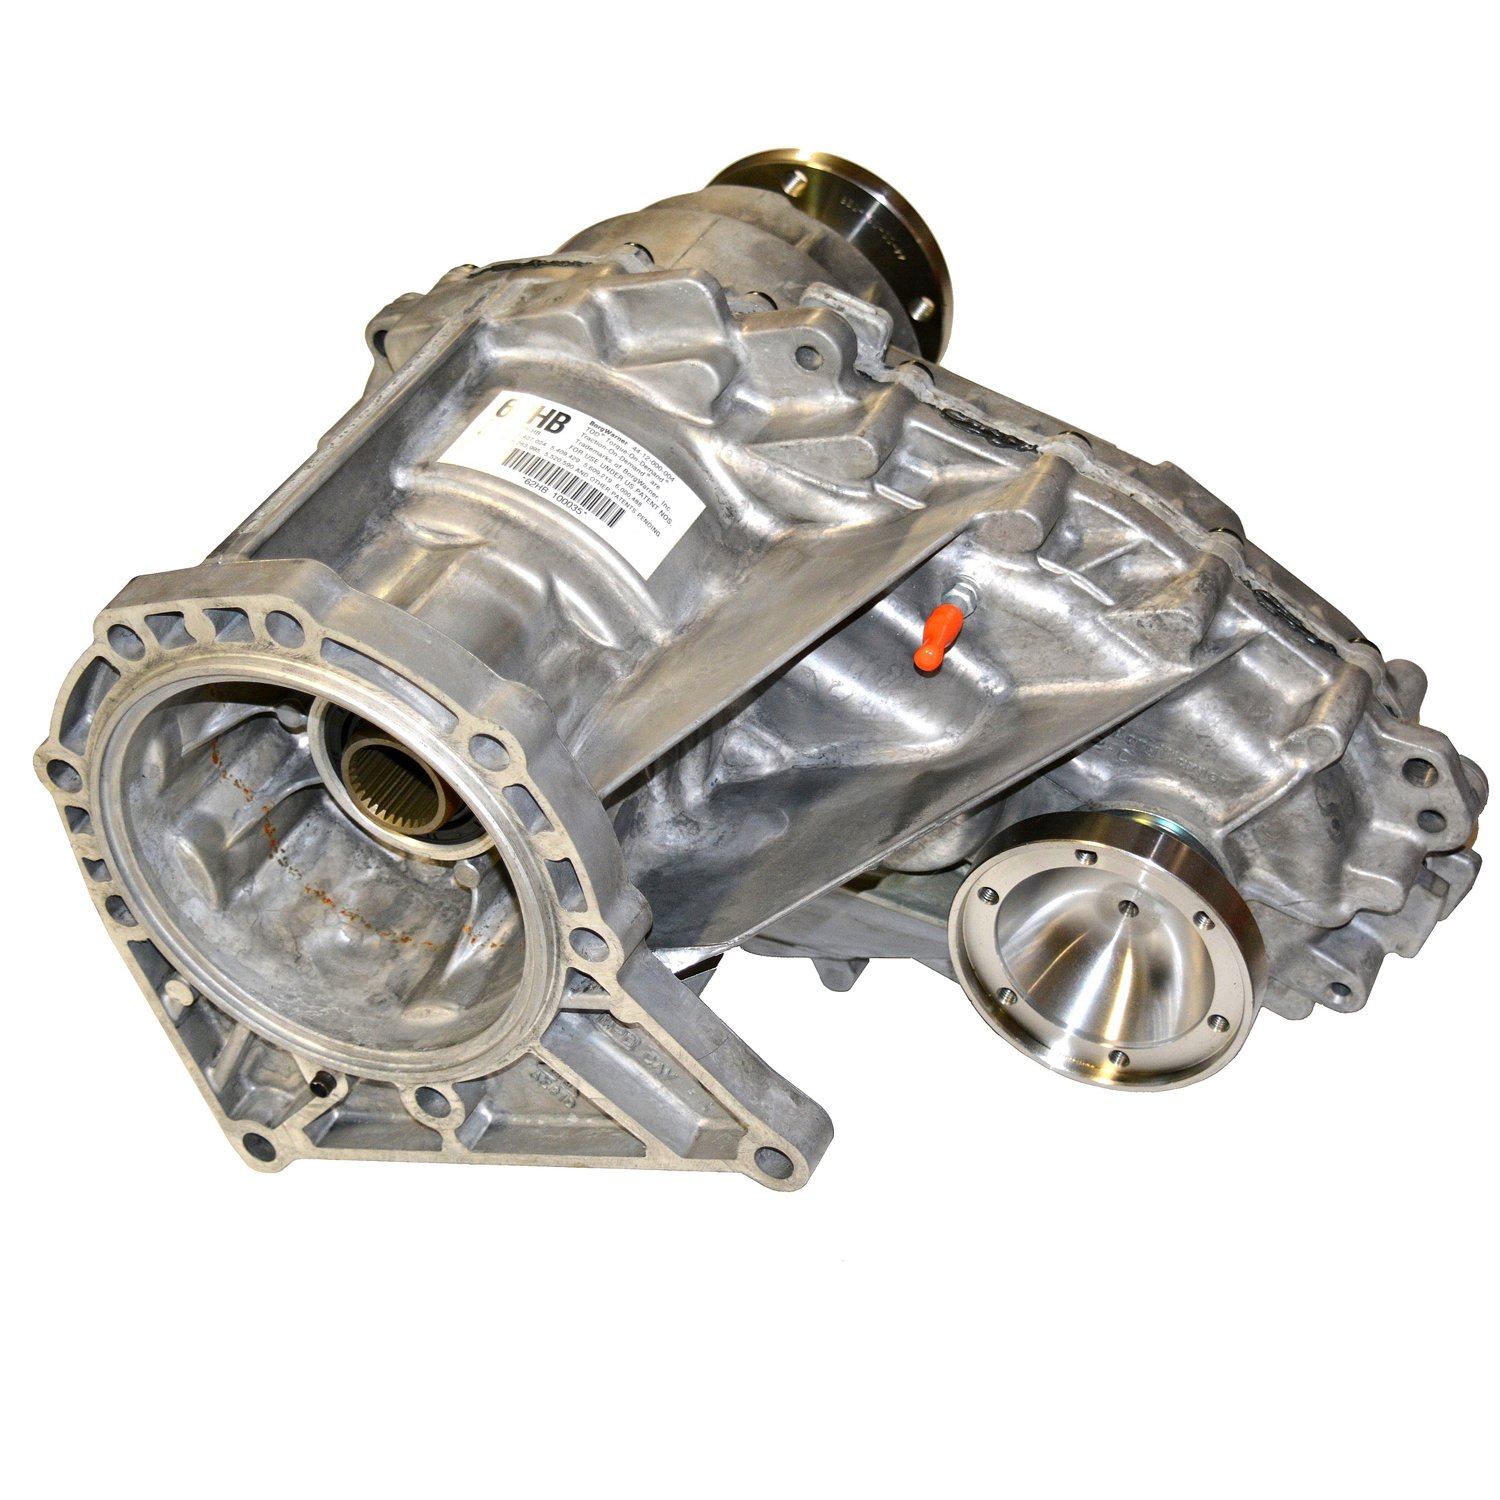 Remanufactured BW4412 Transfer Case for Ford 08-10 Explorer Sport Trac, w/o Shift Motor